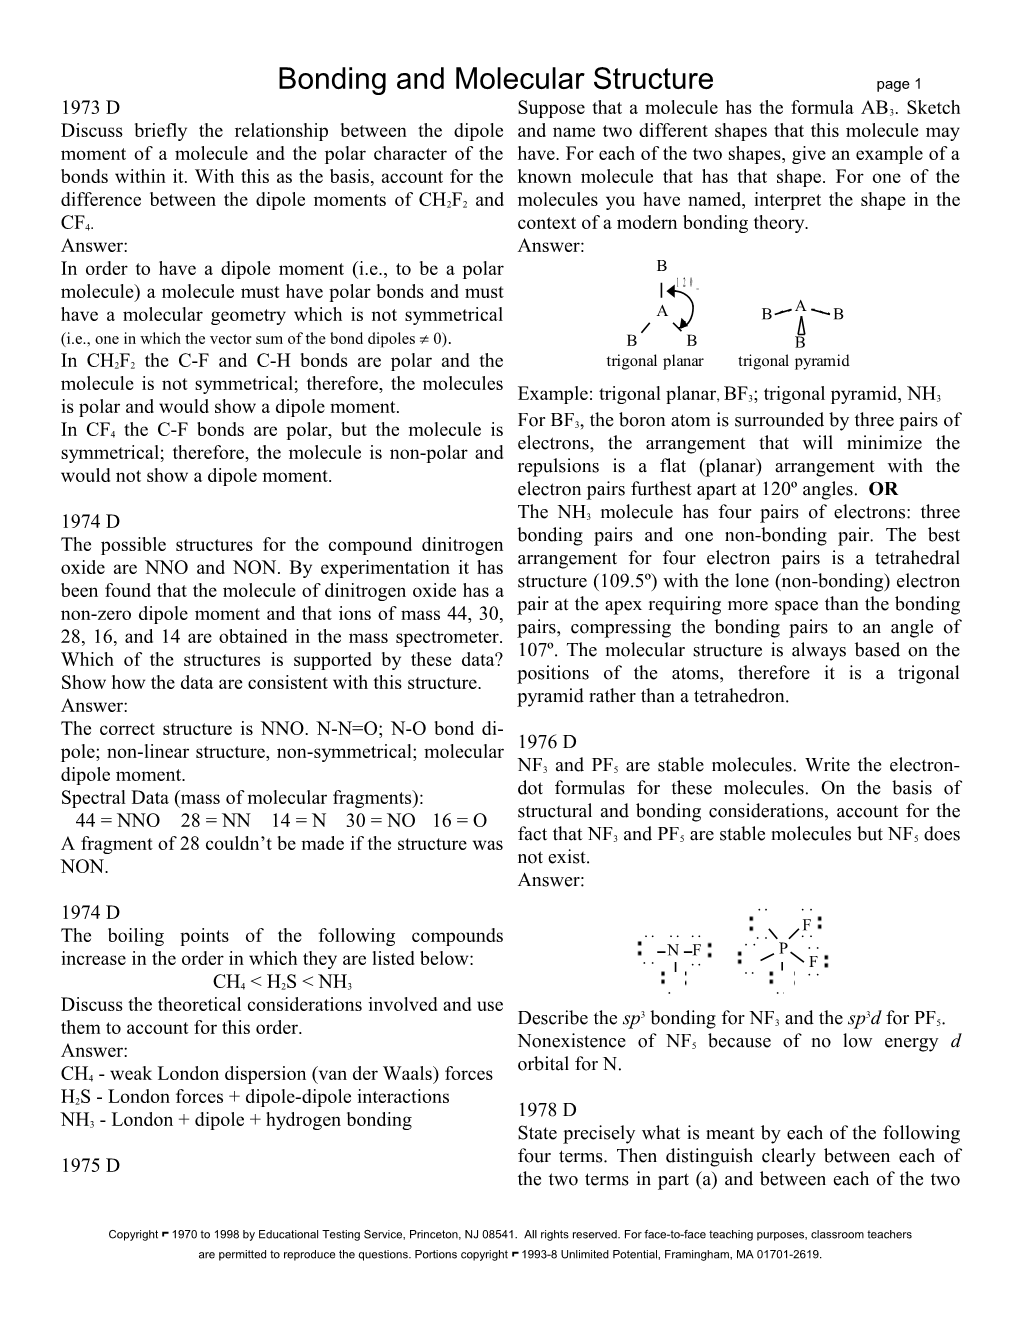 Bonding and Molecular Structure Page 11